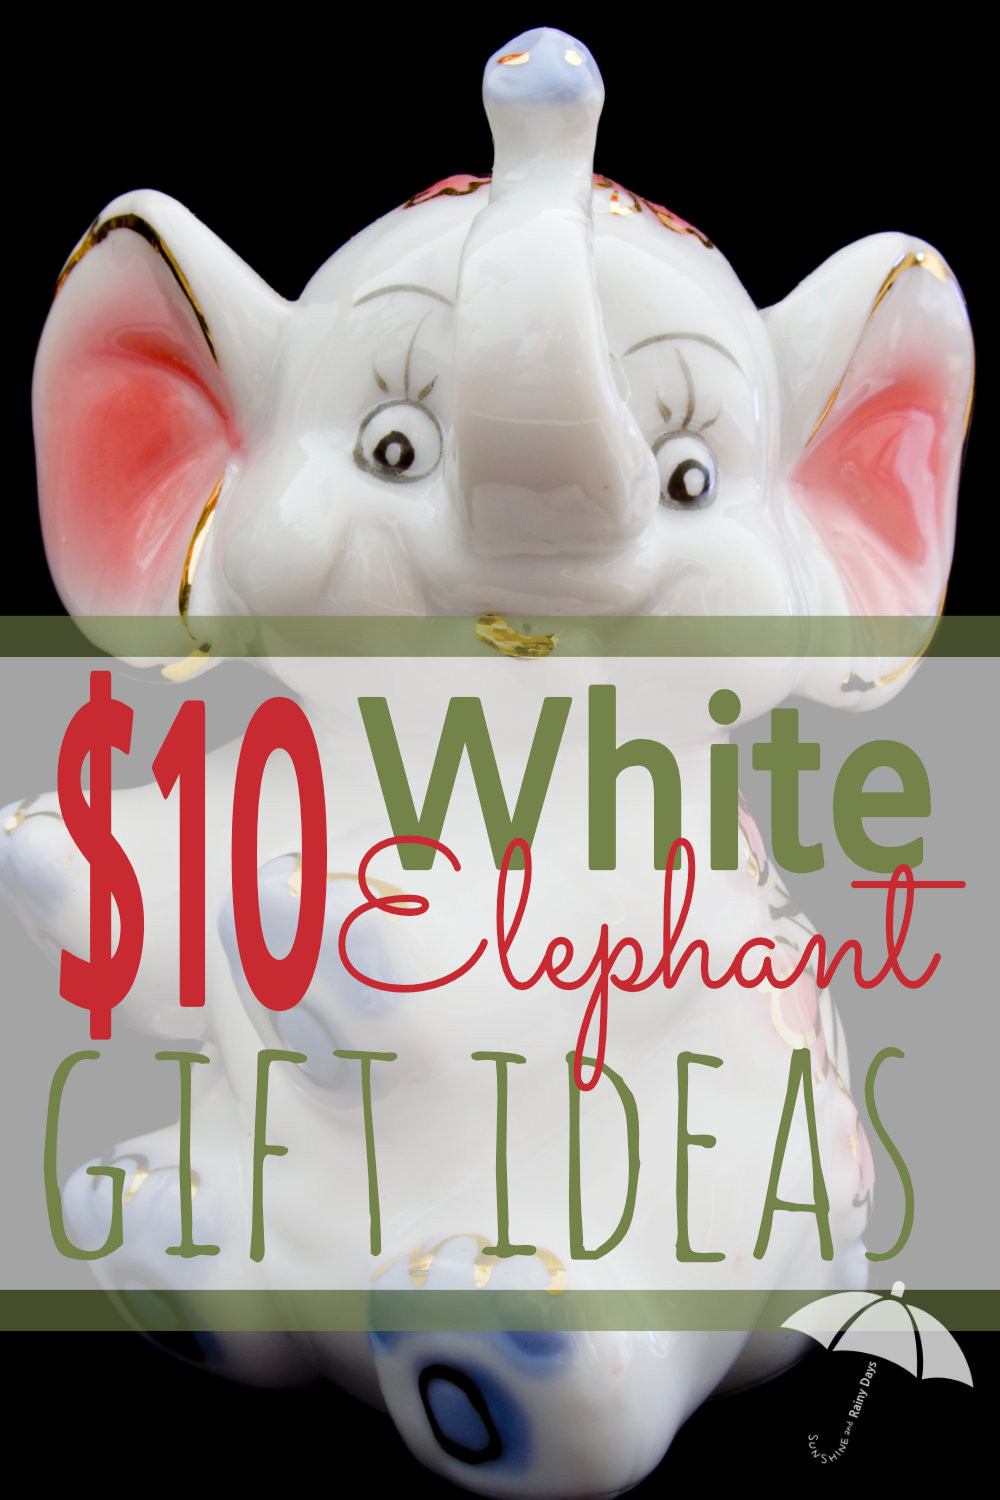 Best ideas about White Elephant Gift Ideas $10
. Save or Pin $10 White Elephant Gift Exchange Ideas Sunshine and Now.